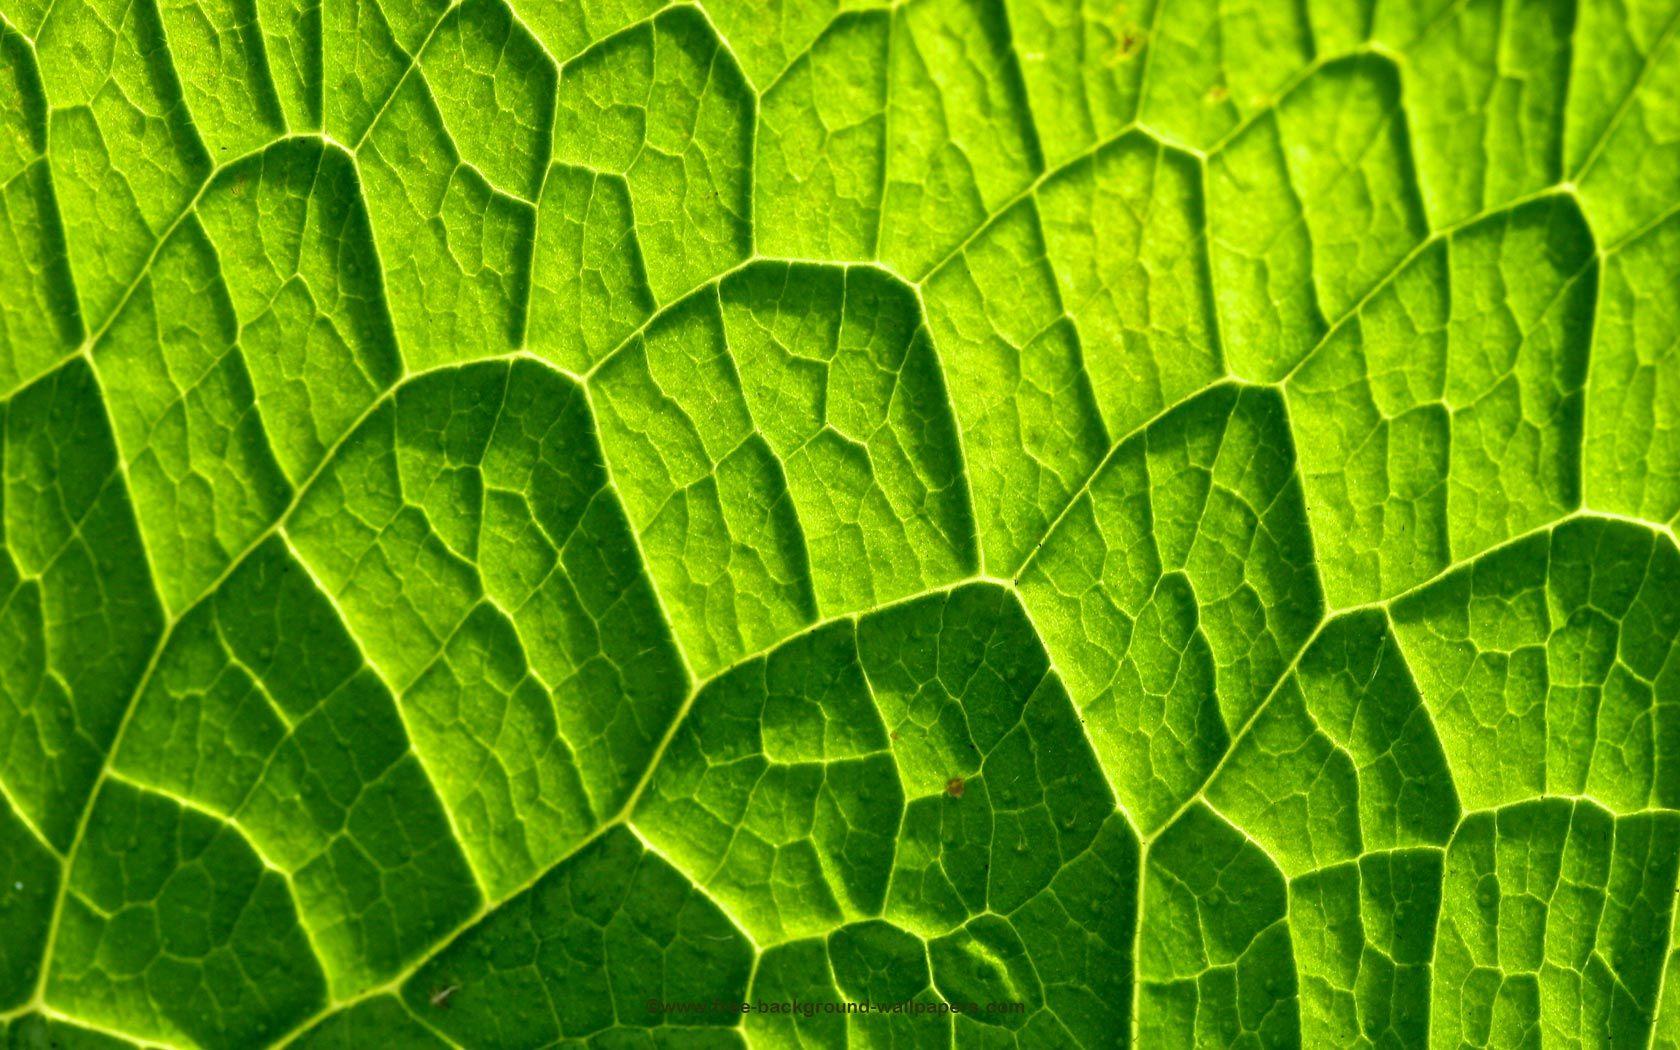 Leaf Texture Wallpapers - Top Free Leaf Texture Backgrounds ...